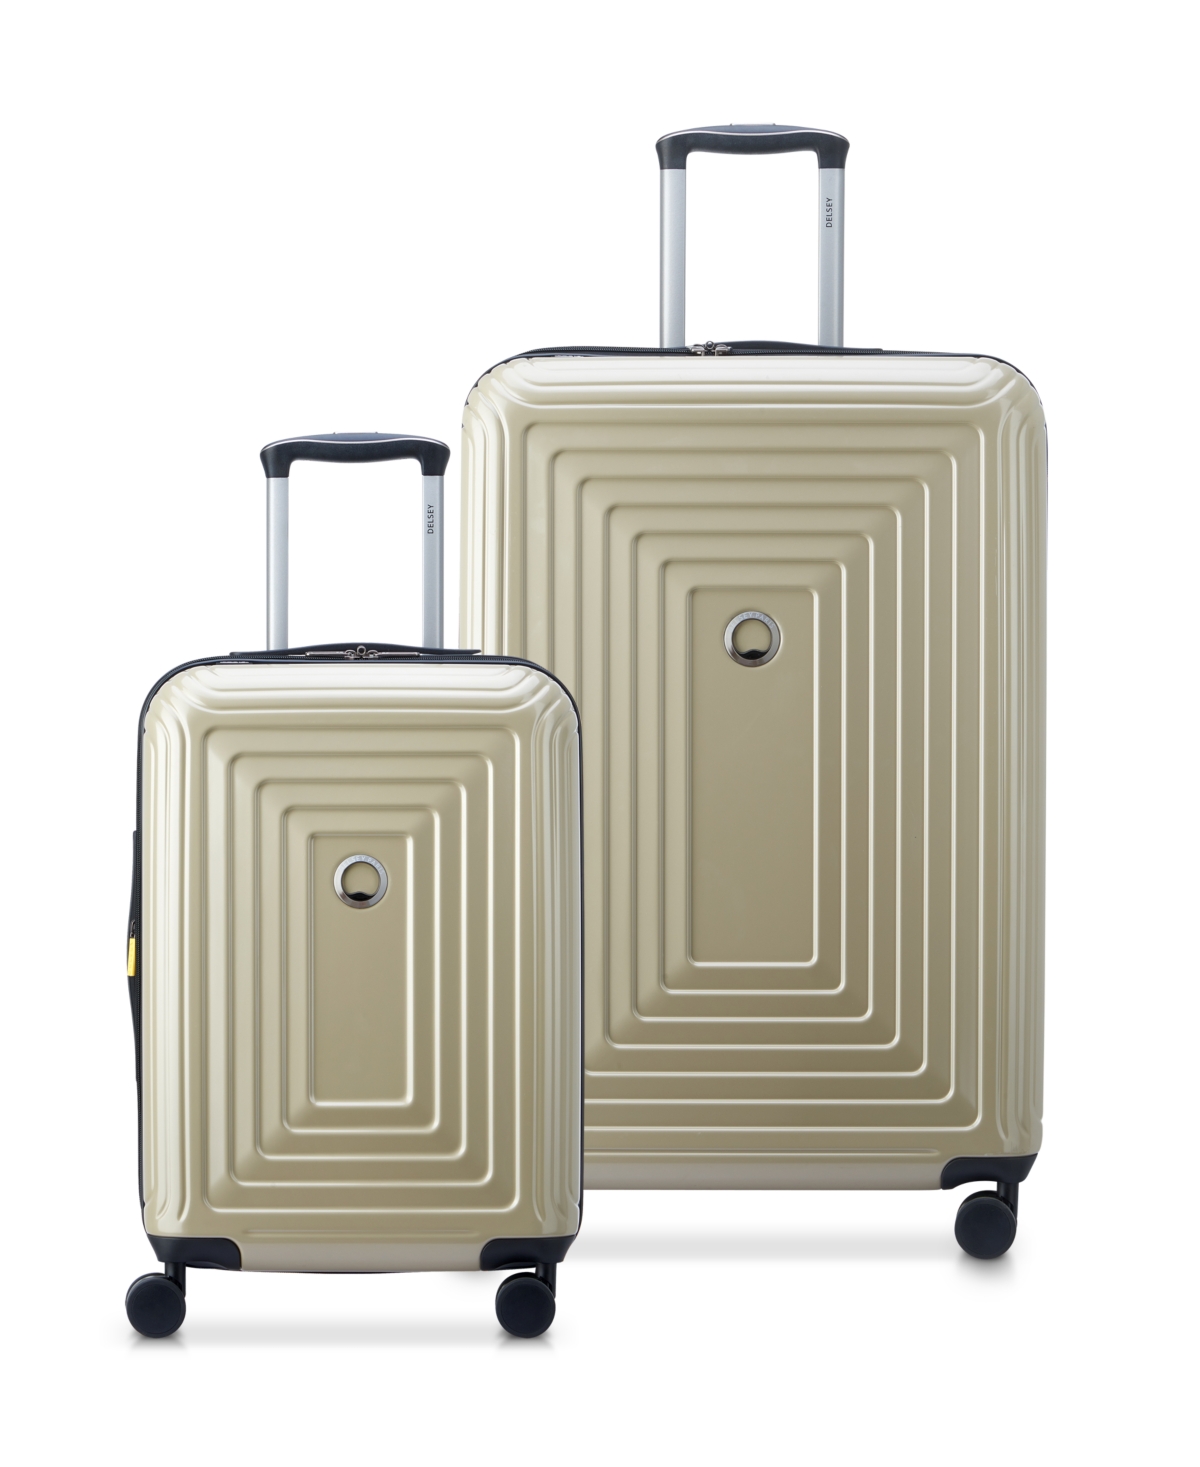 Corsica 2 Piece Hardside Luggage Set, Carry-On and 27" Spinner - Glossy Bronze